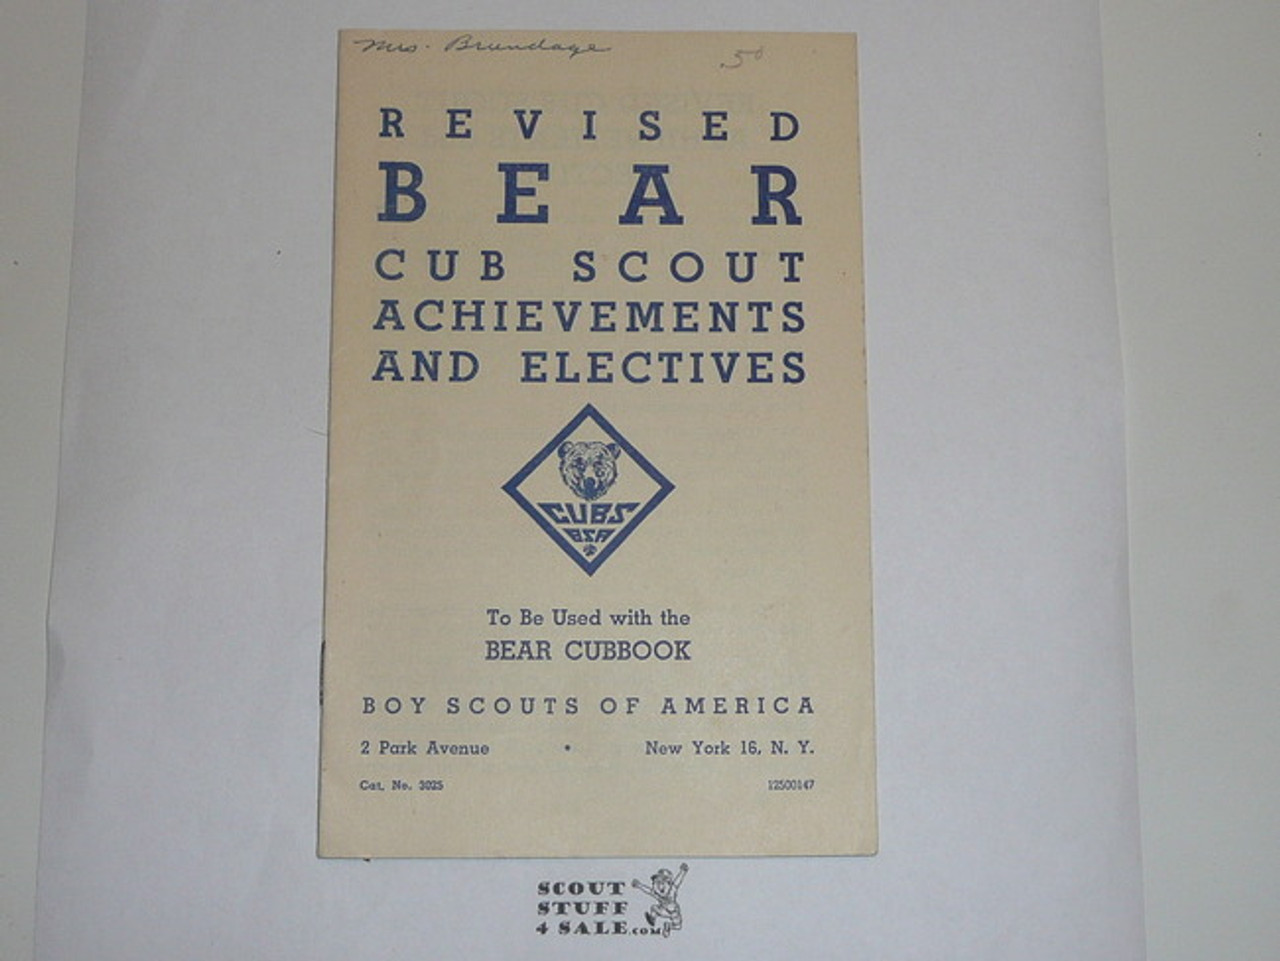 1947 Revised Bear Cub Scout Requirements, 1-47 Printing